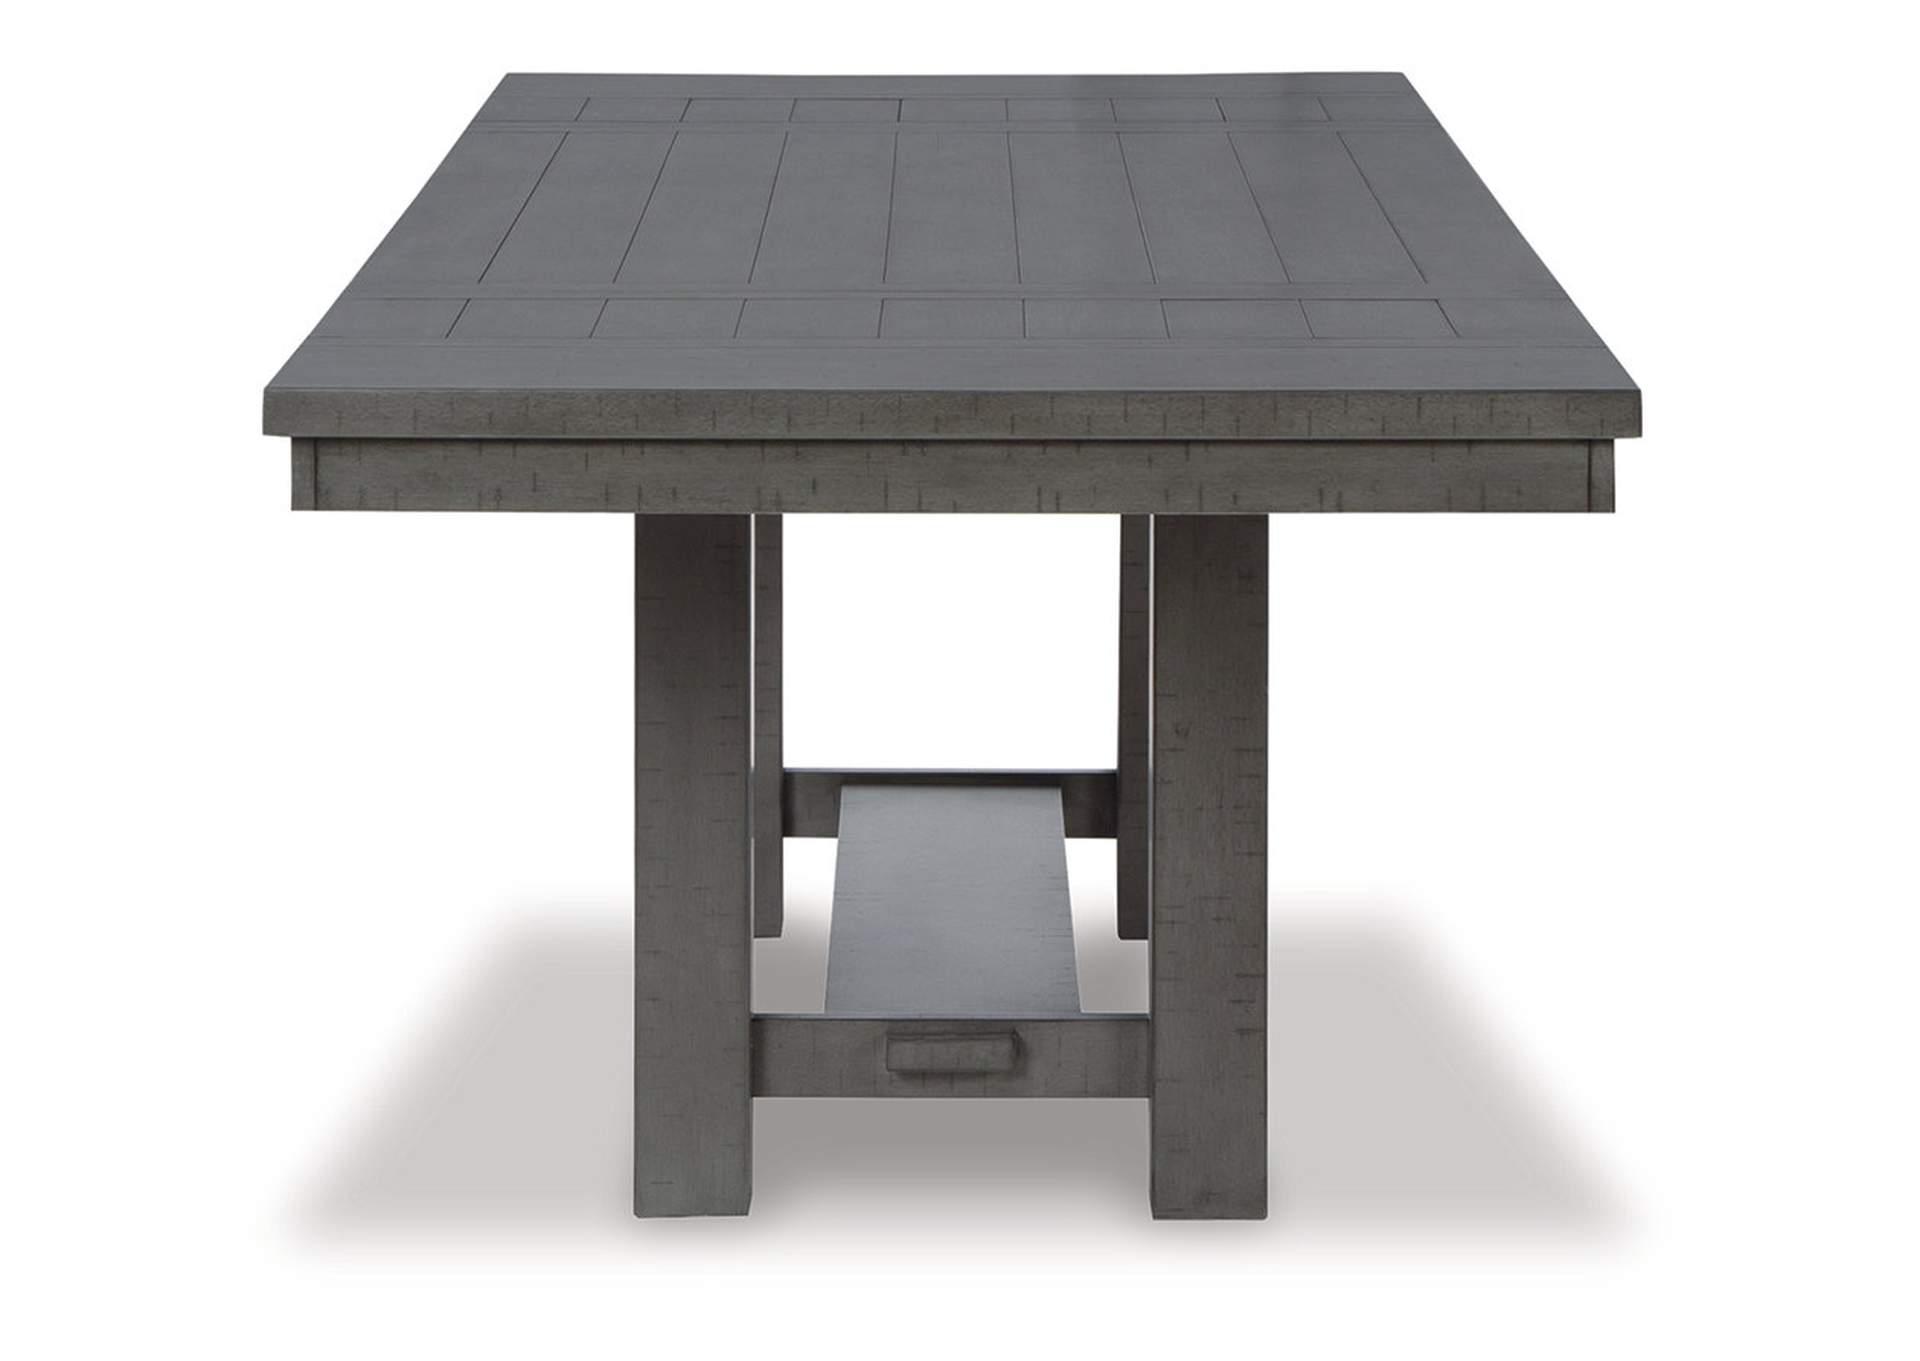 Myshanna Dining Extension Table,Signature Design By Ashley